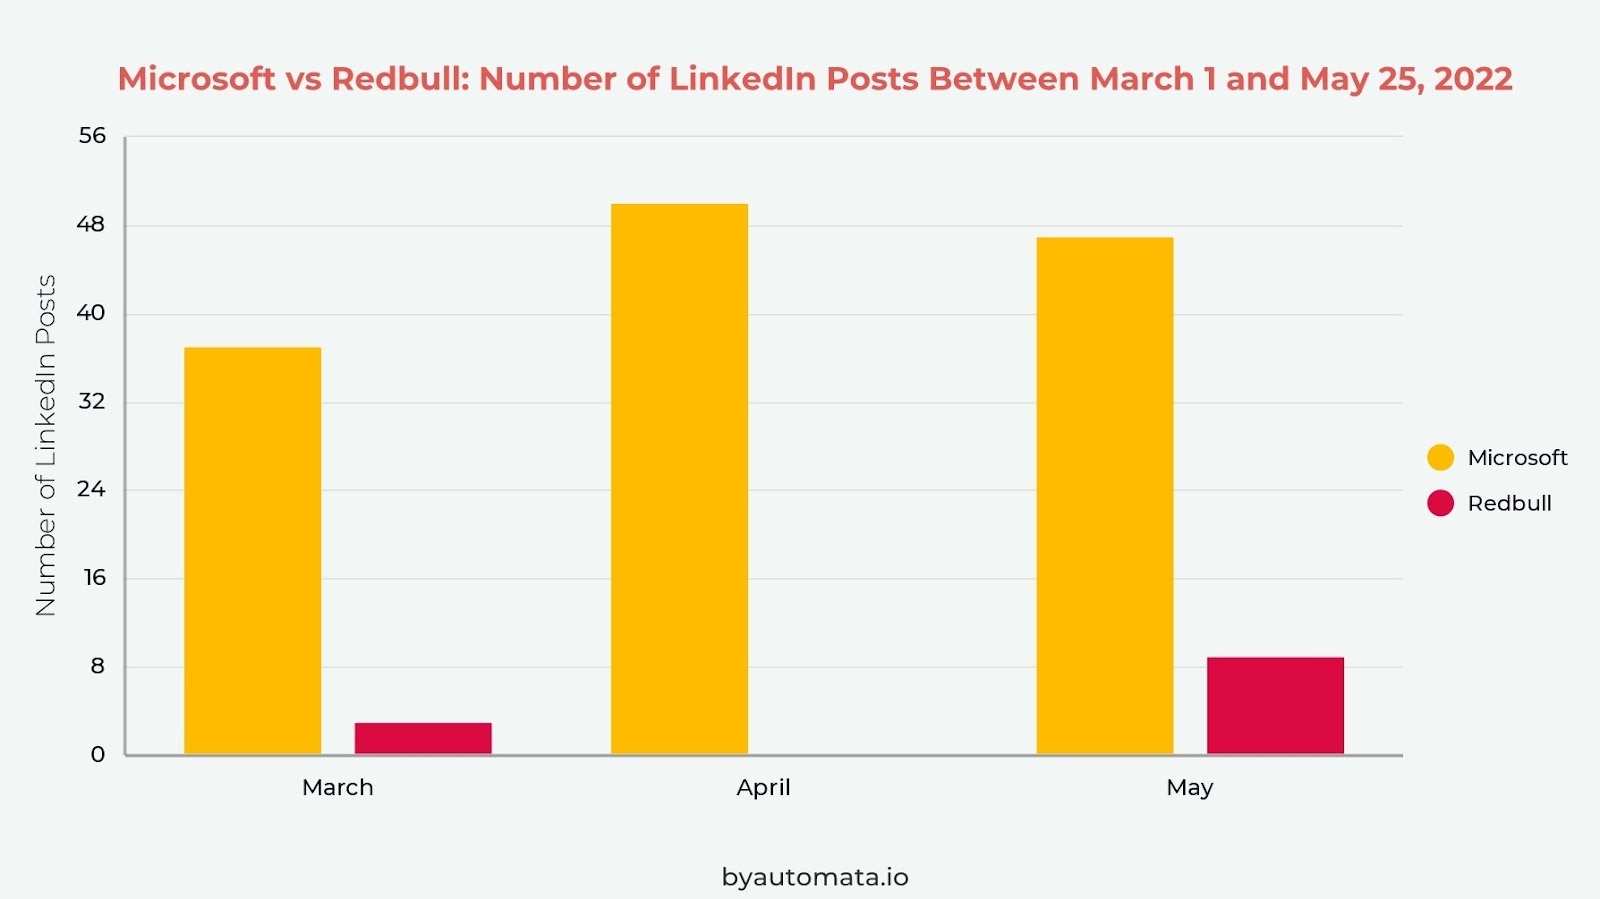 Microsoft vs. Redbull: Number of LinkedIn Posts between March 1 and May 25, 2022